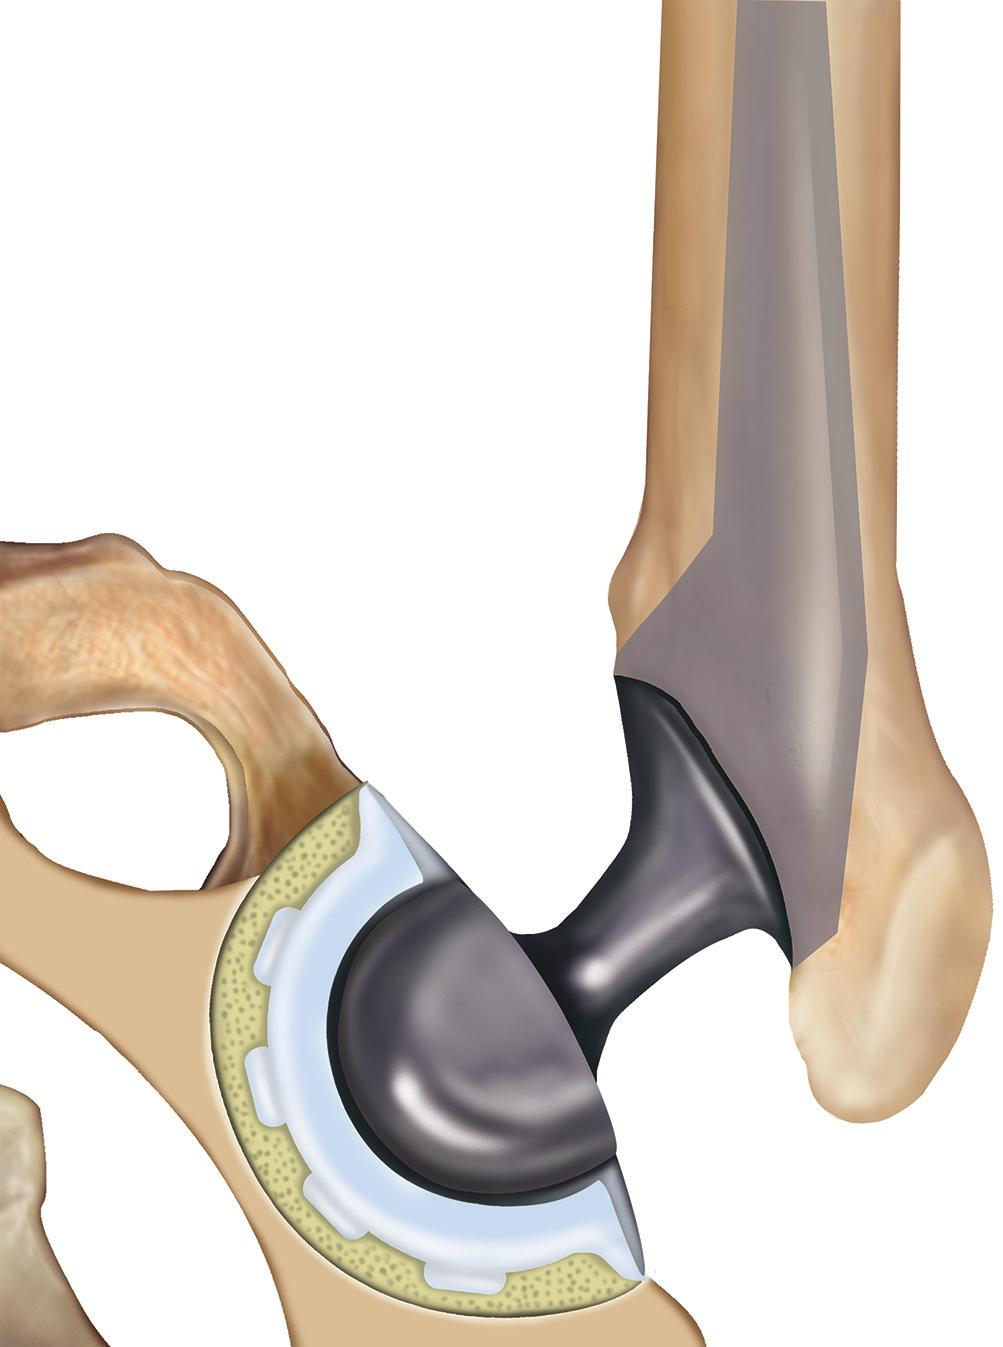 What is arthritis? Arthritis is a group of conditions that cause damage to one or more joints. Your surgeon has recommended a total hip replacement operation (see figure 1).